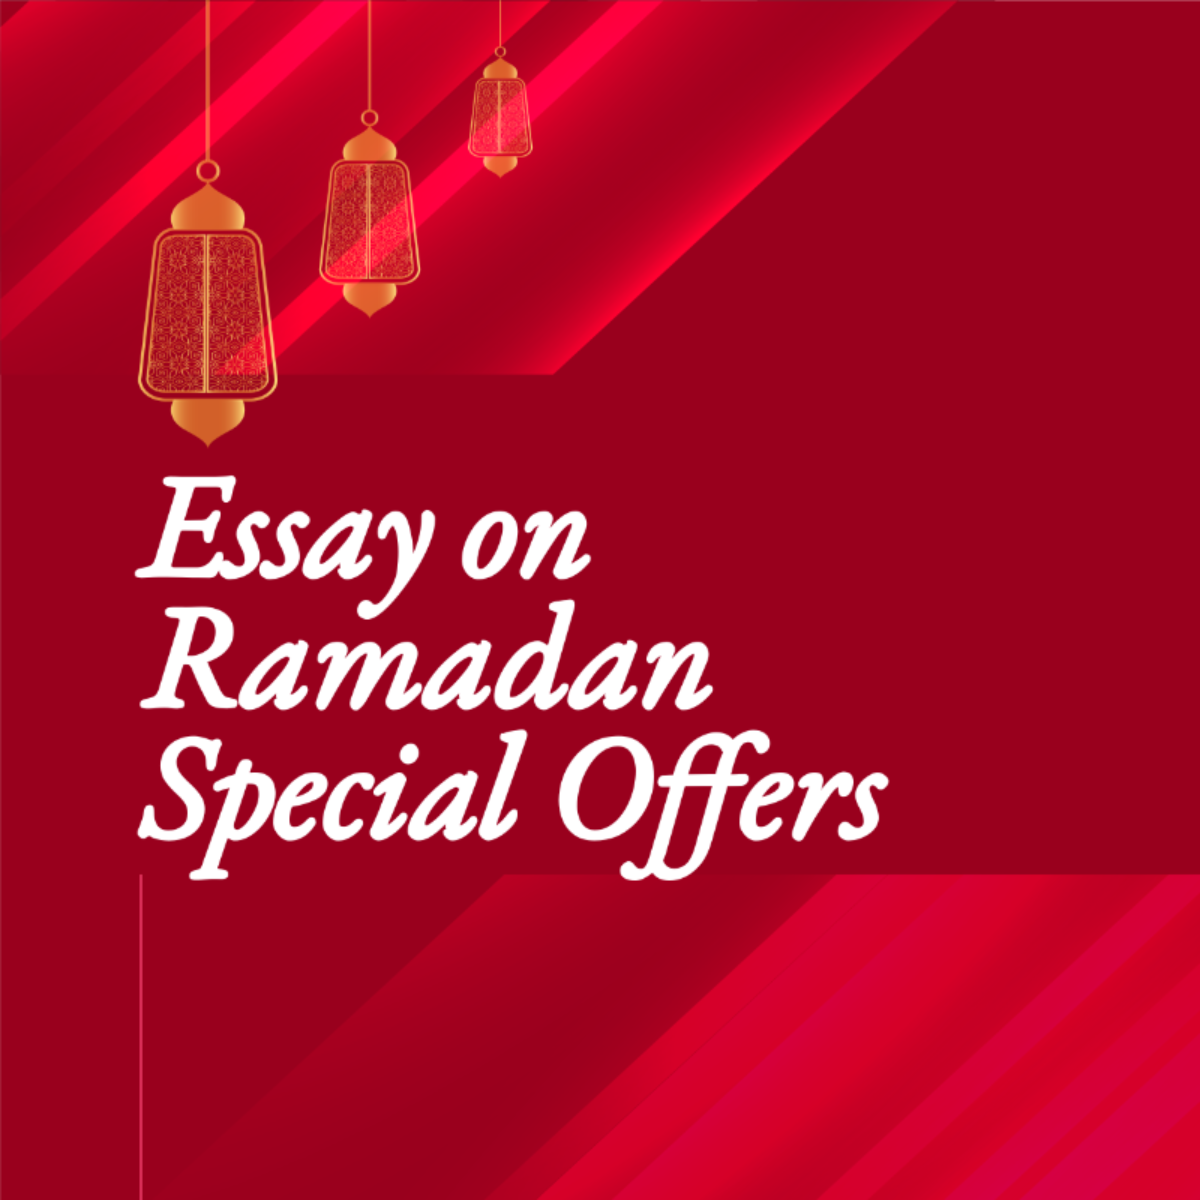 Ramadan Discounts and Promotions Essay Template